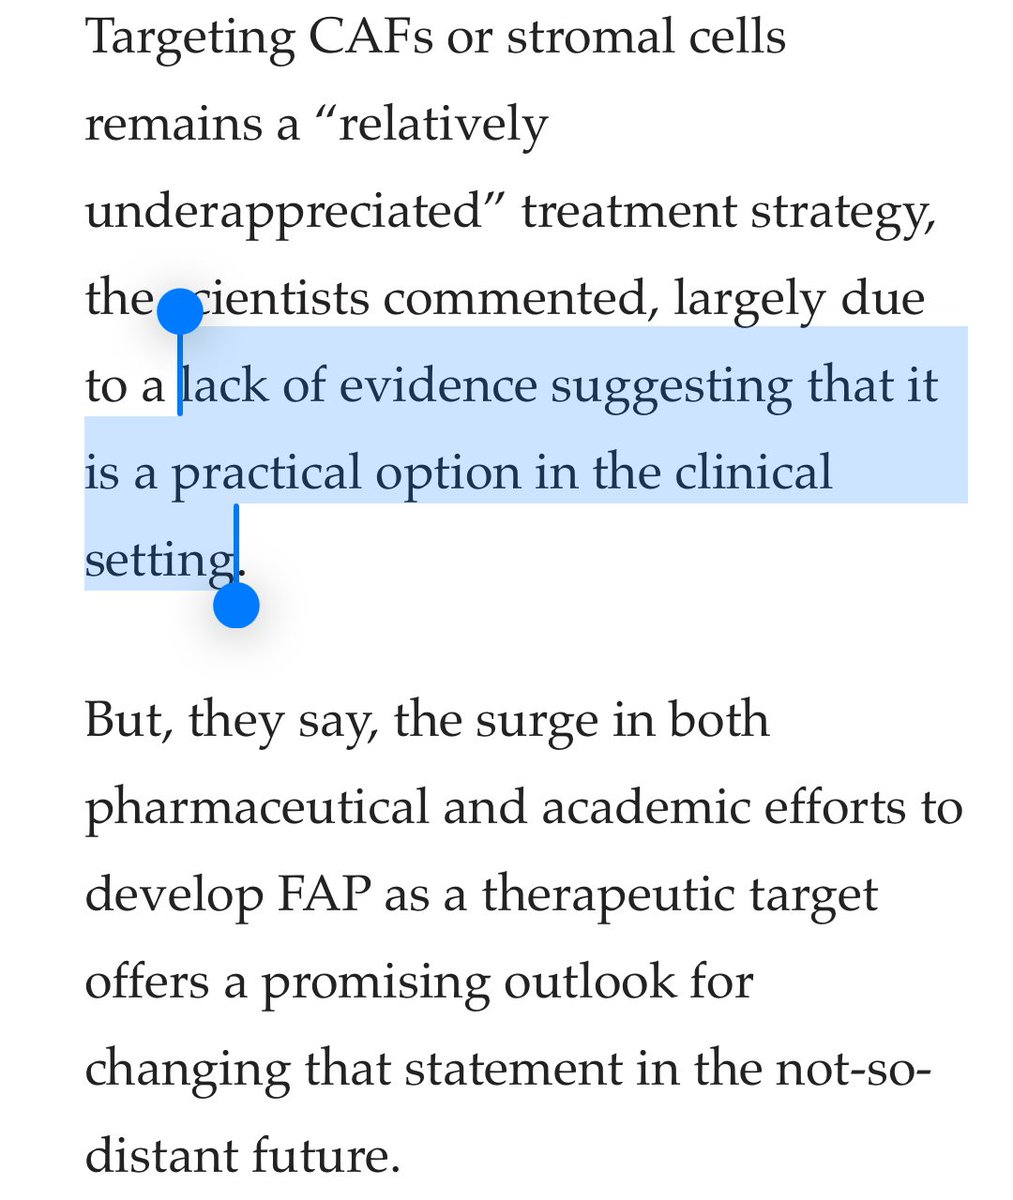 #AVCT “The key target is the stroma itself” FAP is not an appreciated target as there is little evidence, in the clinical setting, to suggest otherwise. Disconnect kinda makes sense. Until such clinical evidence presents itself in such a way.